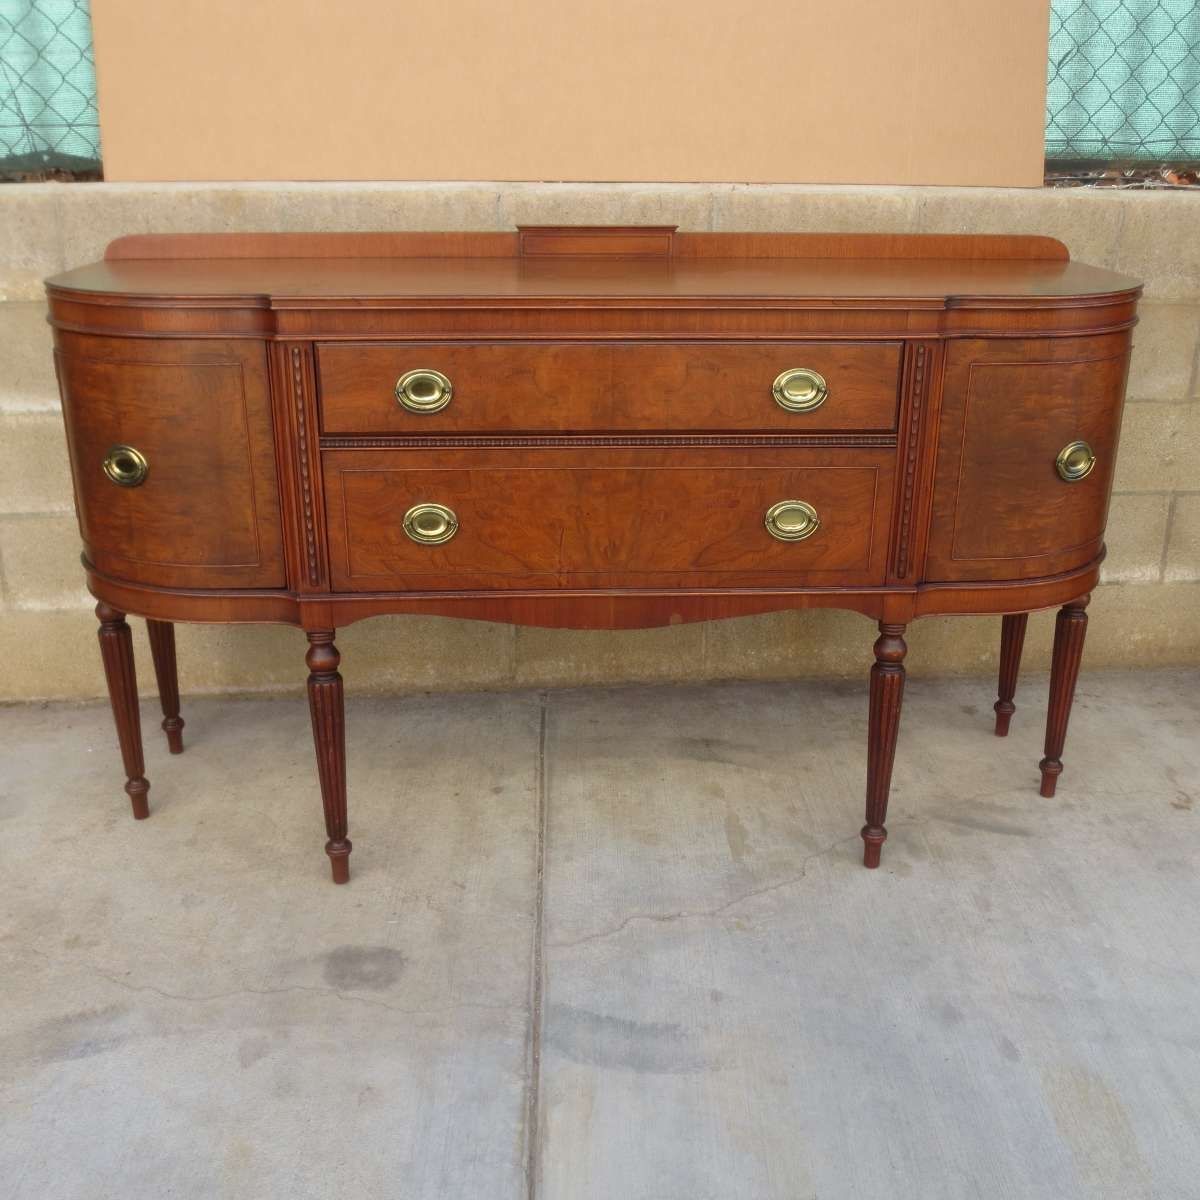 Antique Sideboards And Buffets Models — All Furniture : Antique Intended For Antique Sideboards (View 3 of 20)